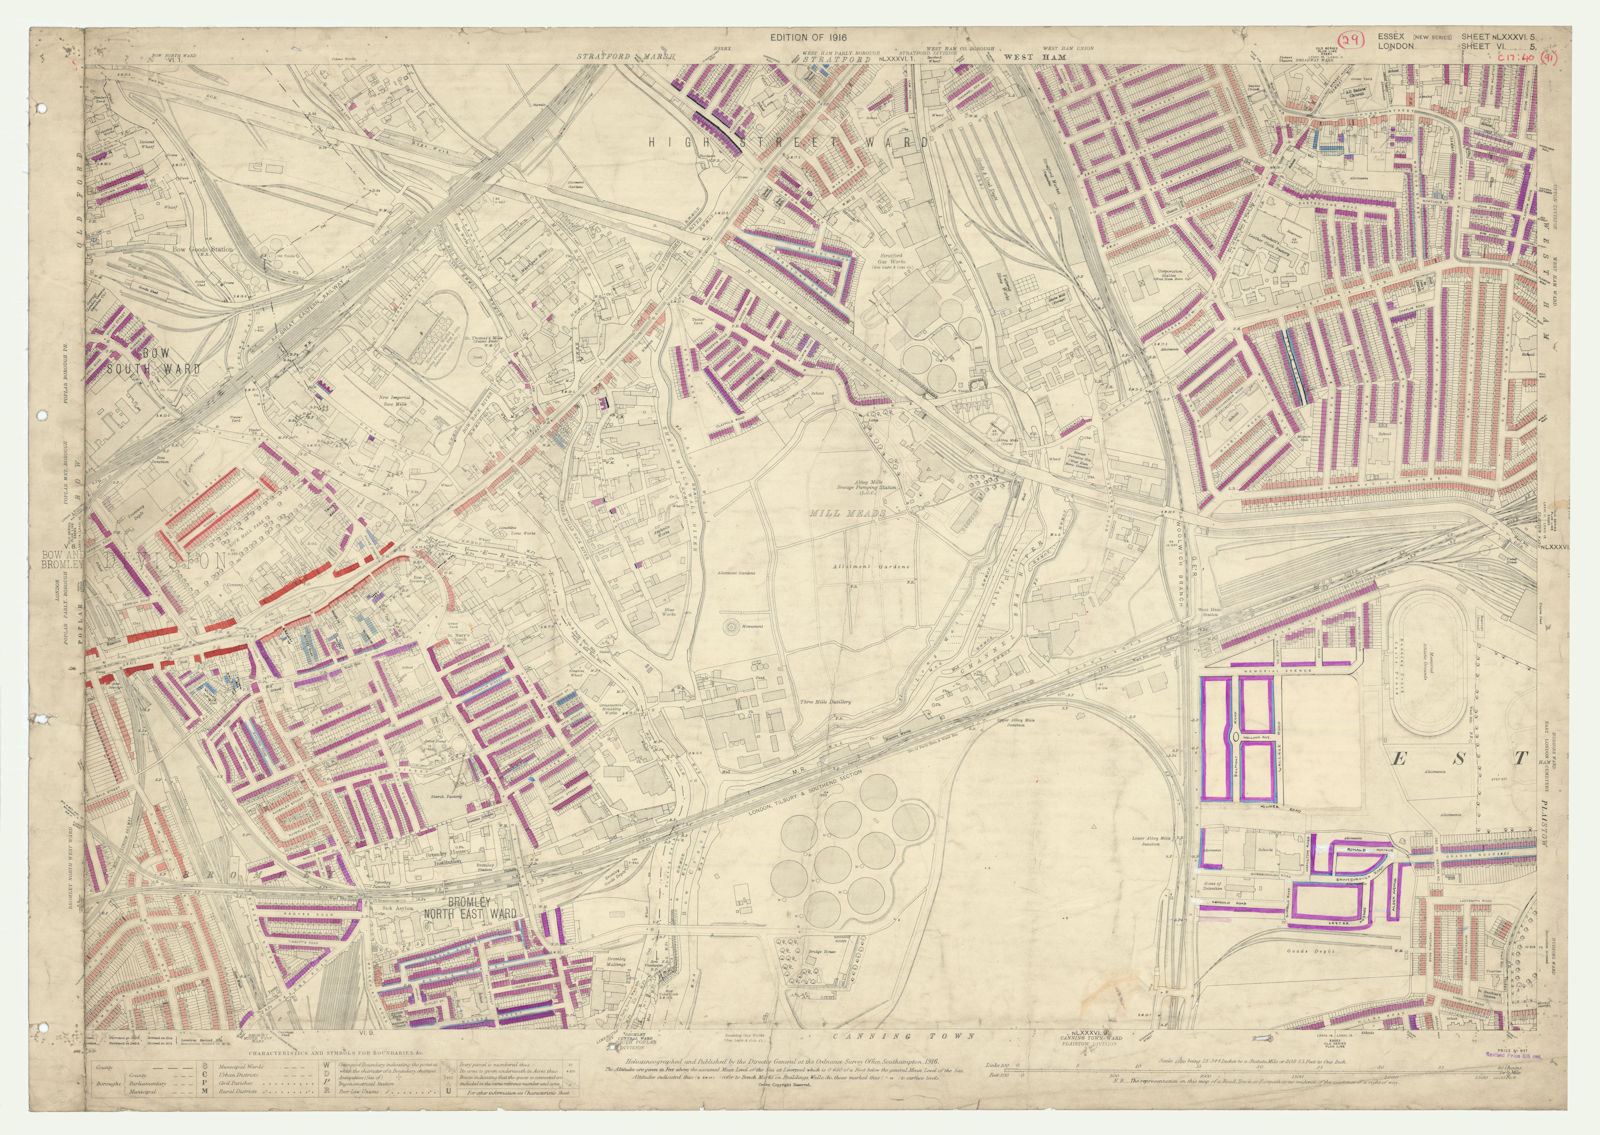 Associate Product LSE POVERTY OS PROOF MAP Bromley-by-Bow - West Ham - Stratford 1928 old